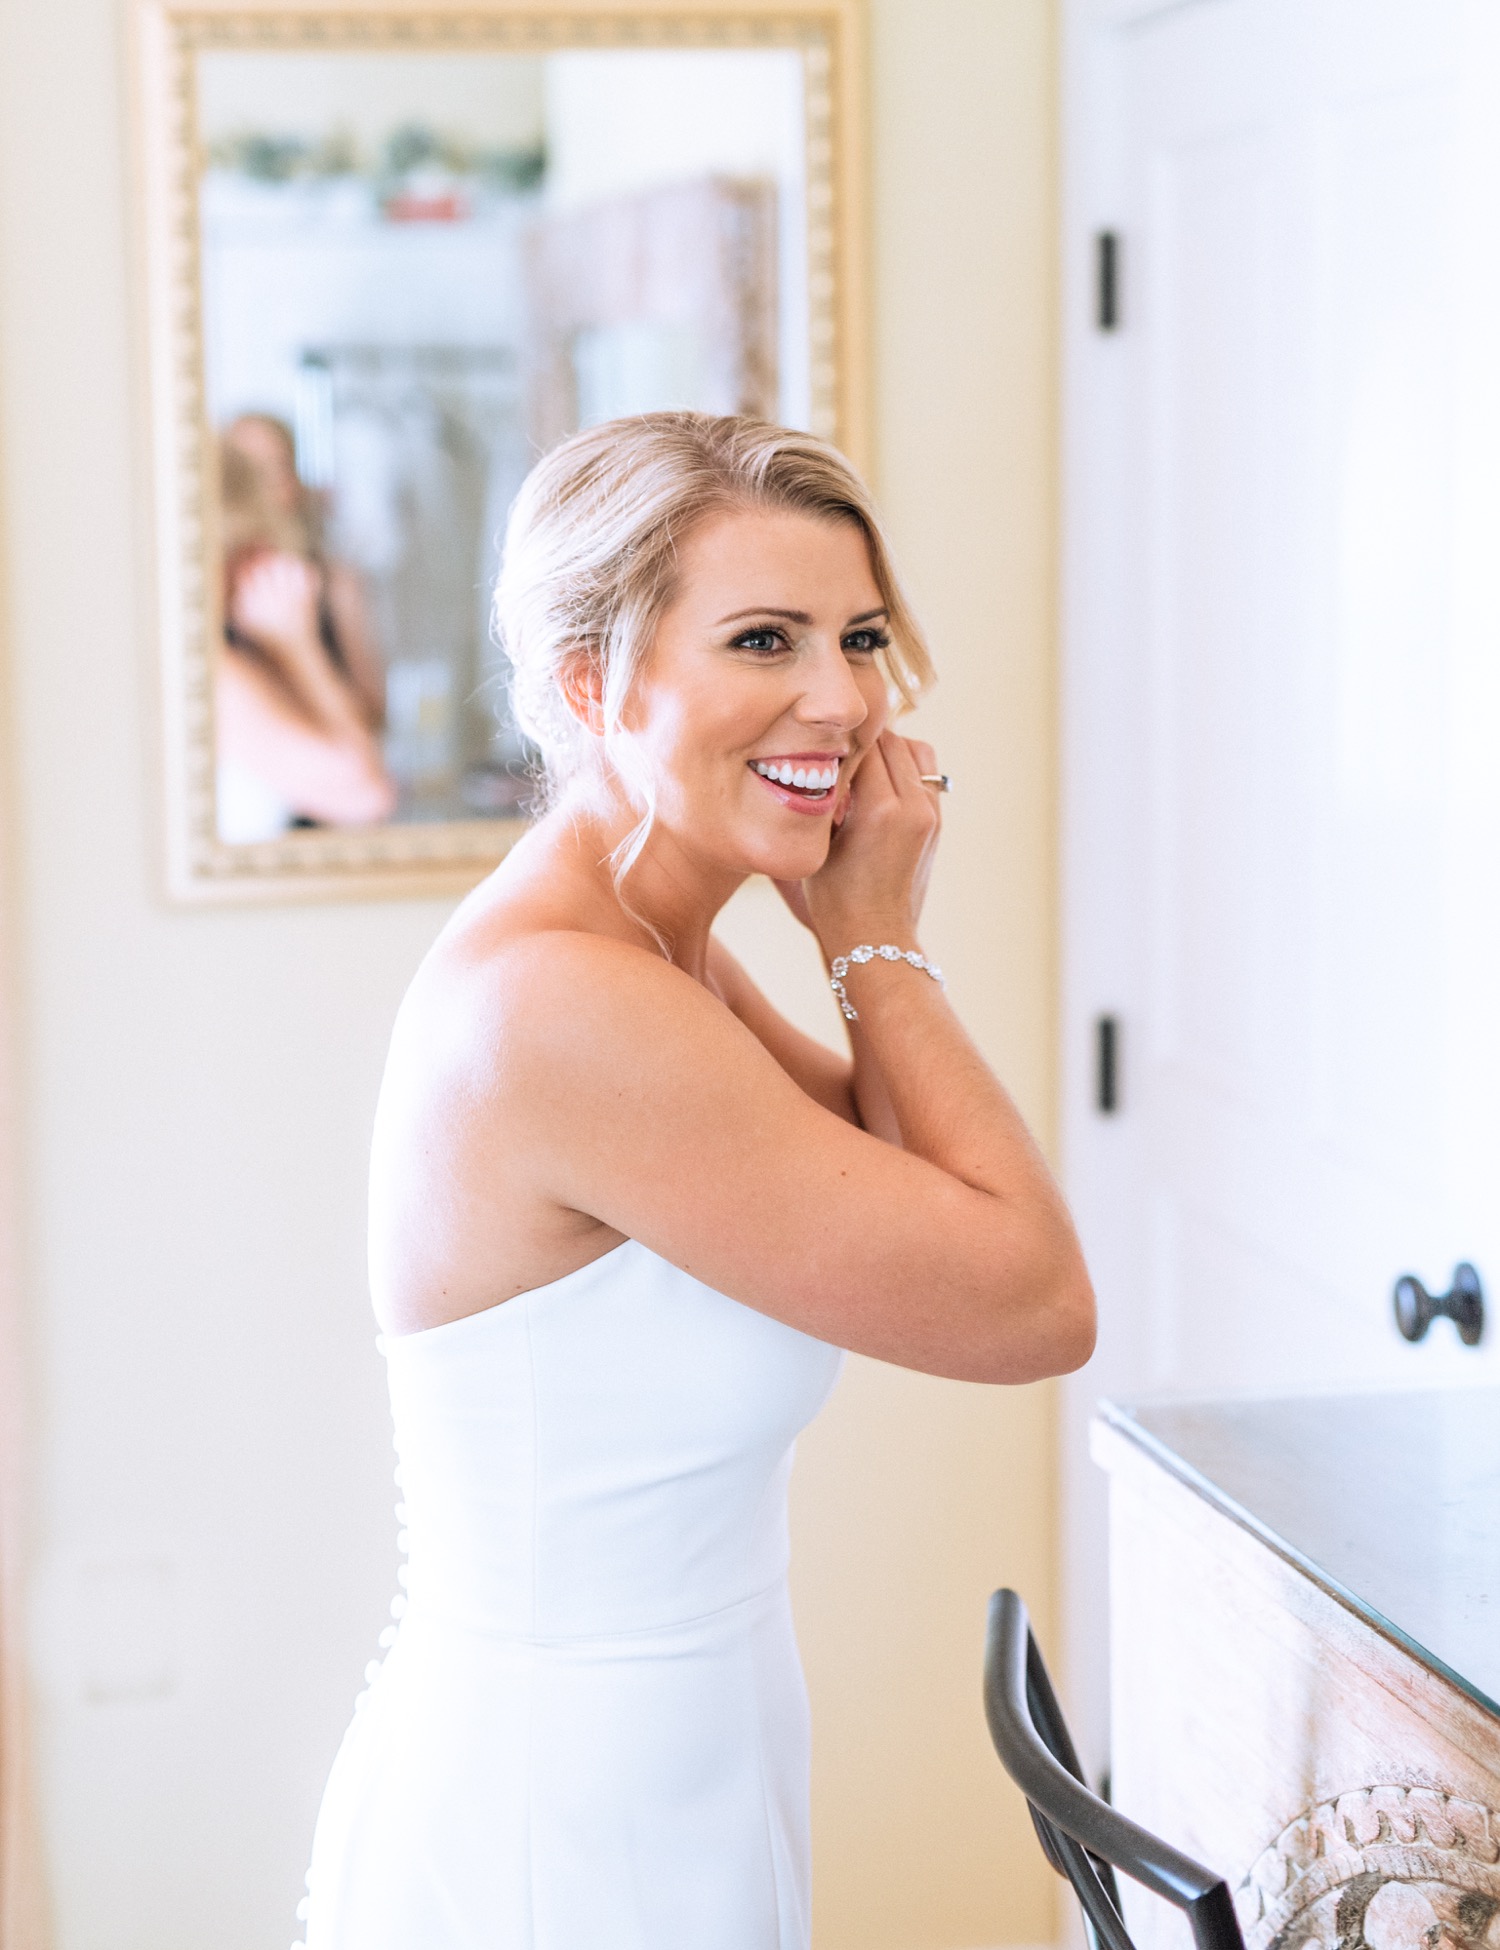 Bride putting in earrings as her final touch before she heads to her wedding ceremony in Richmond, Virginia summer wedding